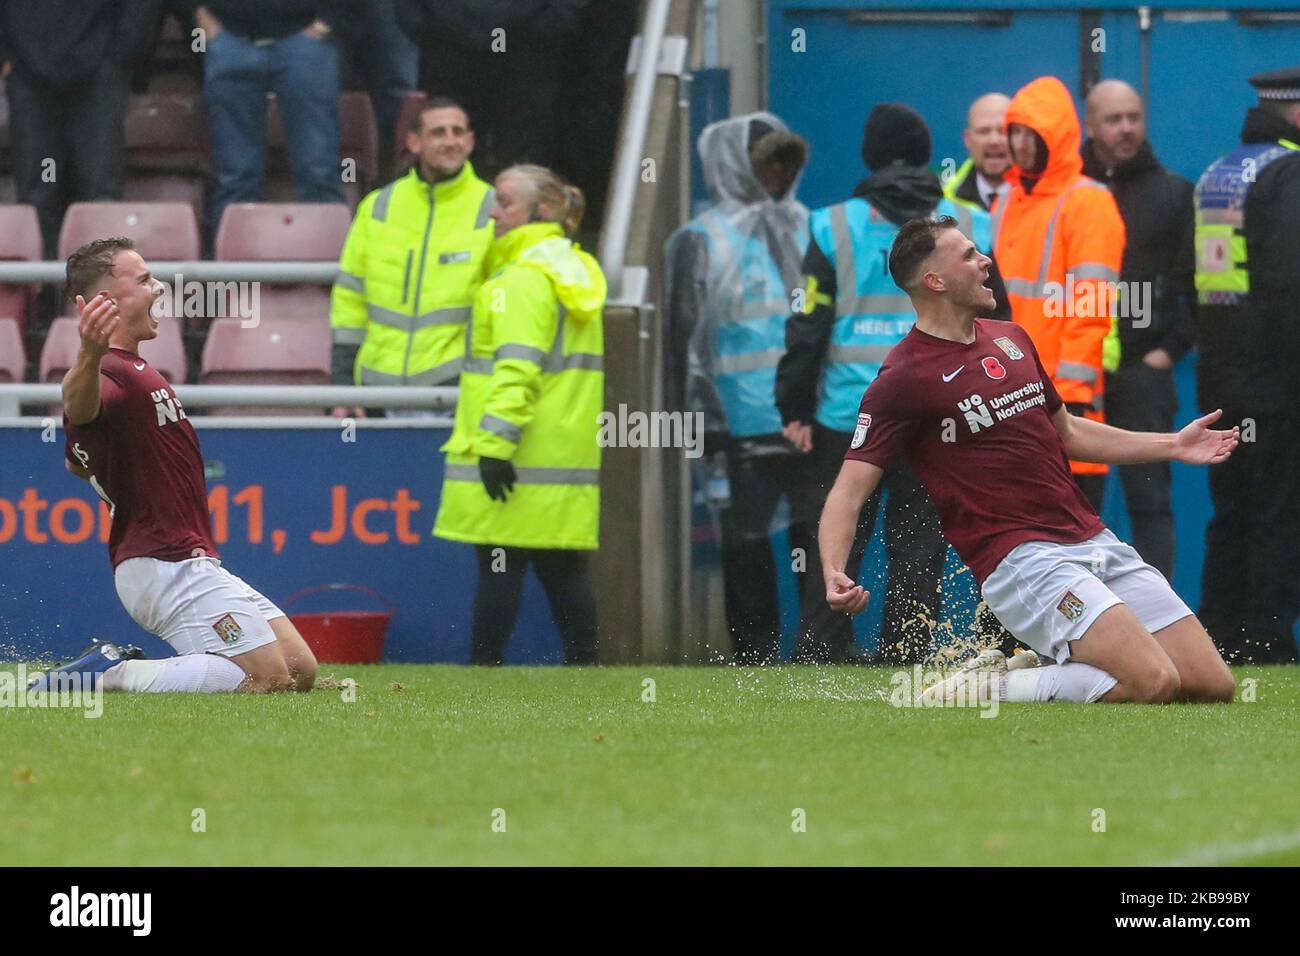 Harry Smith celebrates after scoring for Northampton Town, to take the lead making it 1 - 0 against Cambridge United, during the Sky Bet League 2 match between Northampton Town and Cambridge United at the PTS Academy Stadium, Northampton on Saturday 26th October 2019. (Photo by John Cripps/MI News/NurPhoto) Stock Photo